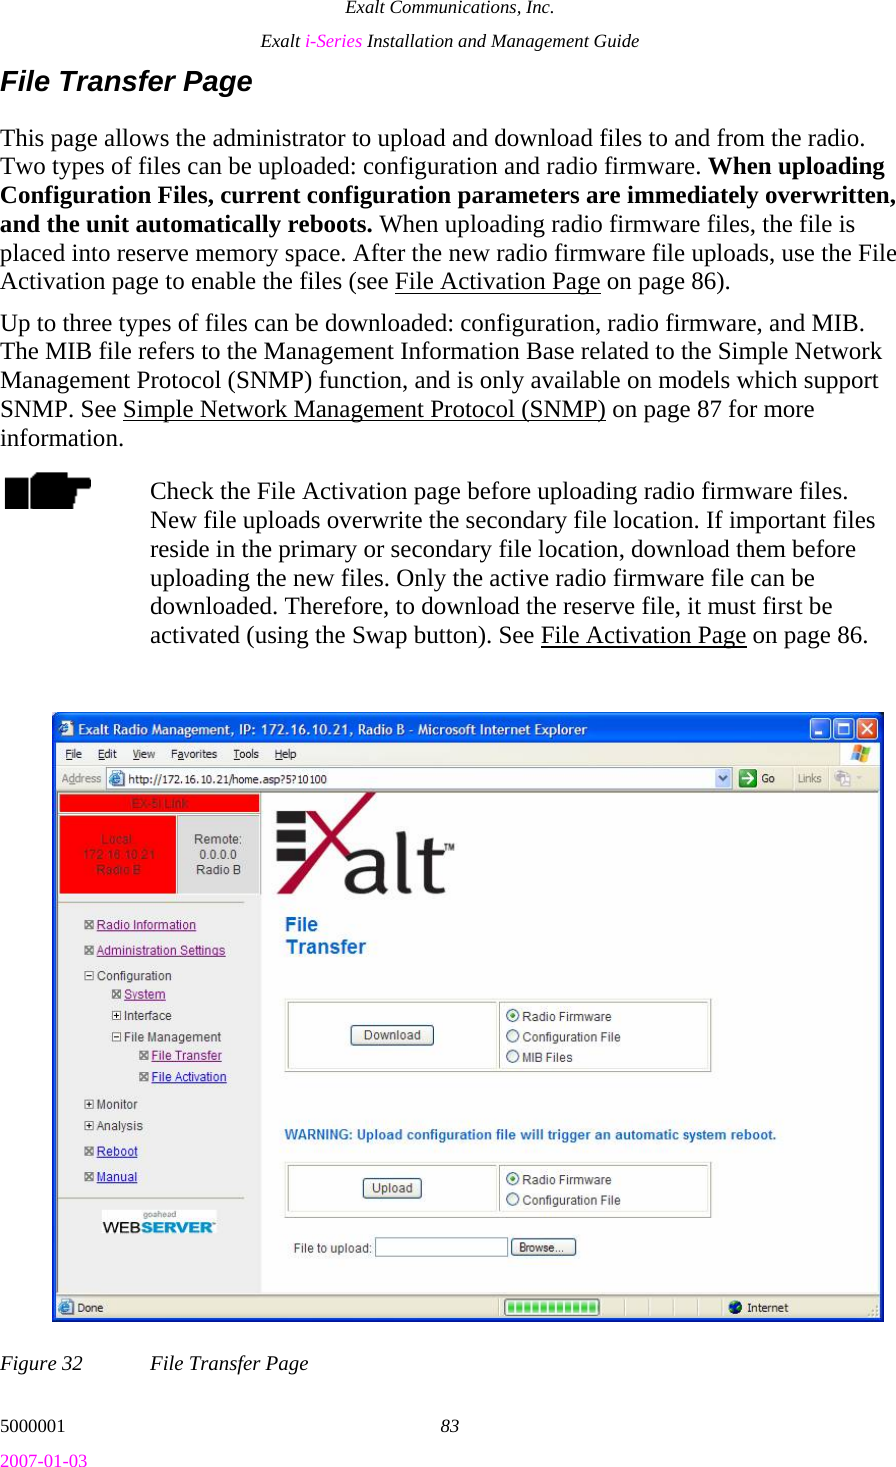 Exalt Communications, Inc. Exalt i-Series Installation and Management Guide 5000001  83 2007-01-03 File Transfer Page This page allows the administrator to upload and download files to and from the radio. Two types of files can be uploaded: configuration and radio firmware. When uploading Configuration Files, current configuration parameters are immediately overwritten, and the unit automatically reboots. When uploading radio firmware files, the file is placed into reserve memory space. After the new radio firmware file uploads, use the File Activation page to enable the files (see File Activation Page on page 86).  Up to three types of files can be downloaded: configuration, radio firmware, and MIB. The MIB file refers to the Management Information Base related to the Simple Network Management Protocol (SNMP) function, and is only available on models which support SNMP. See Simple Network Management Protocol (SNMP) on page 87 for more information. Check the File Activation page before uploading radio firmware files. New file uploads overwrite the secondary file location. If important files reside in the primary or secondary file location, download them before uploading the new files. Only the active radio firmware file can be downloaded. Therefore, to download the reserve file, it must first be activated (using the Swap button). See File Activation Page on page 86. Figure 32  File Transfer Page 